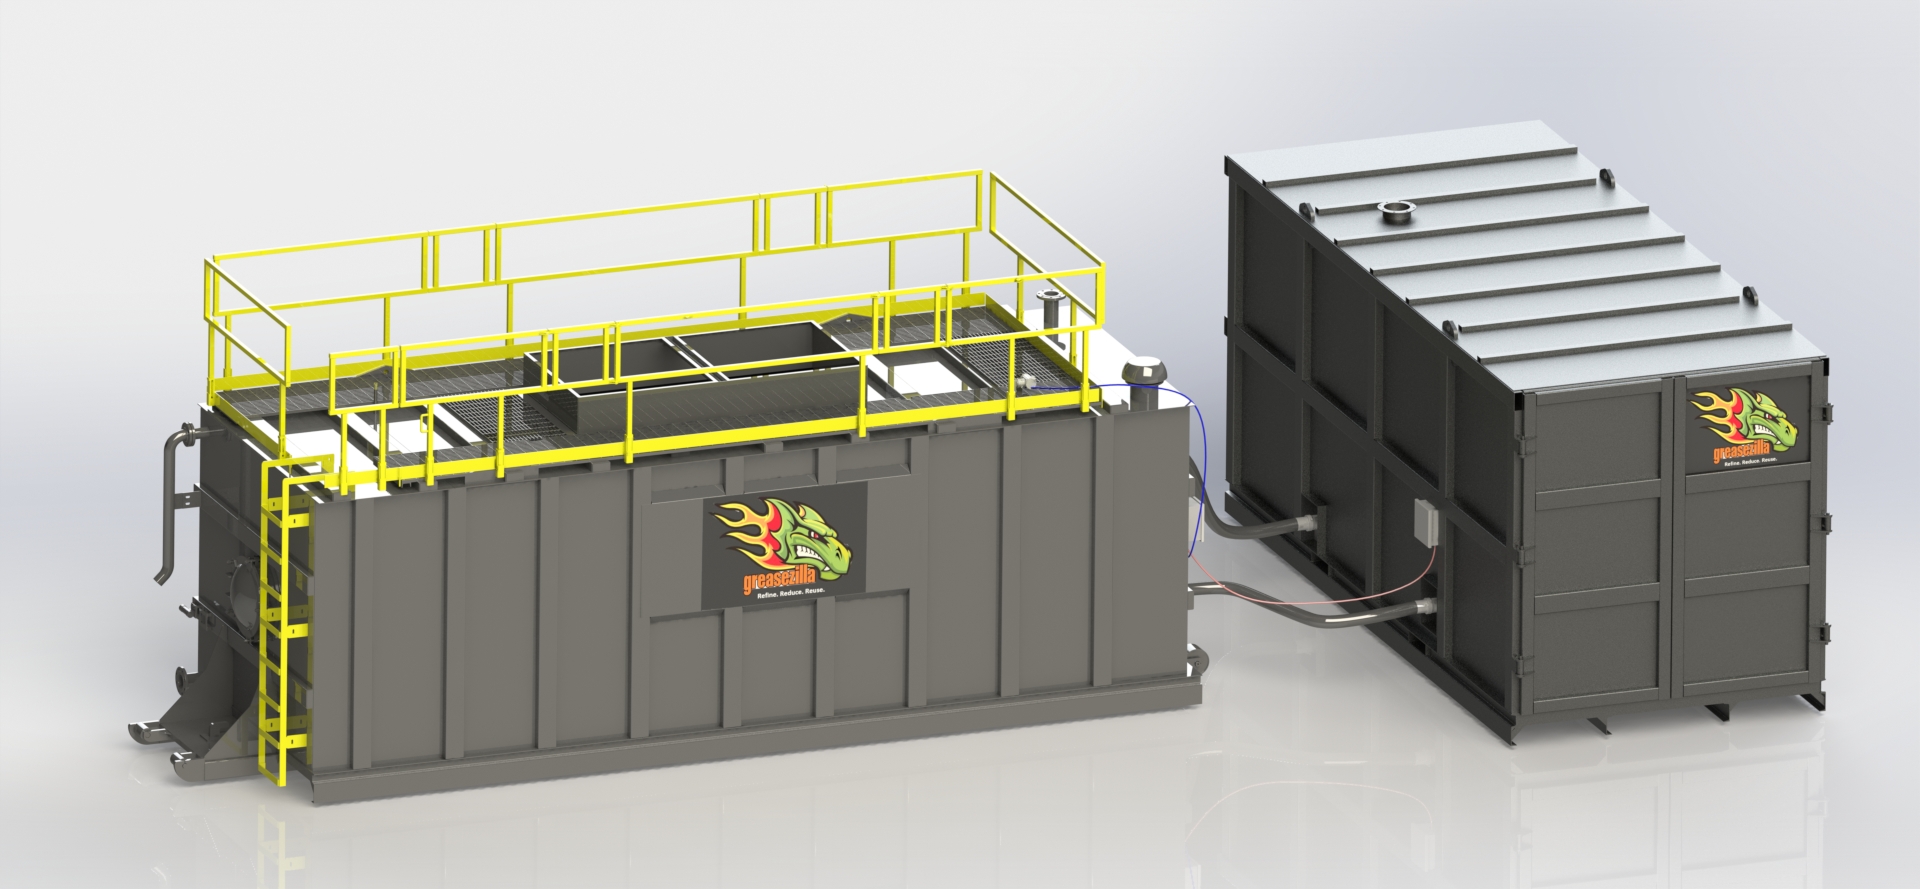 The Greasezilla system will help the New Orleans company to dispose and recycle the vast amounts of grease trap waste they collect from food service businesses.